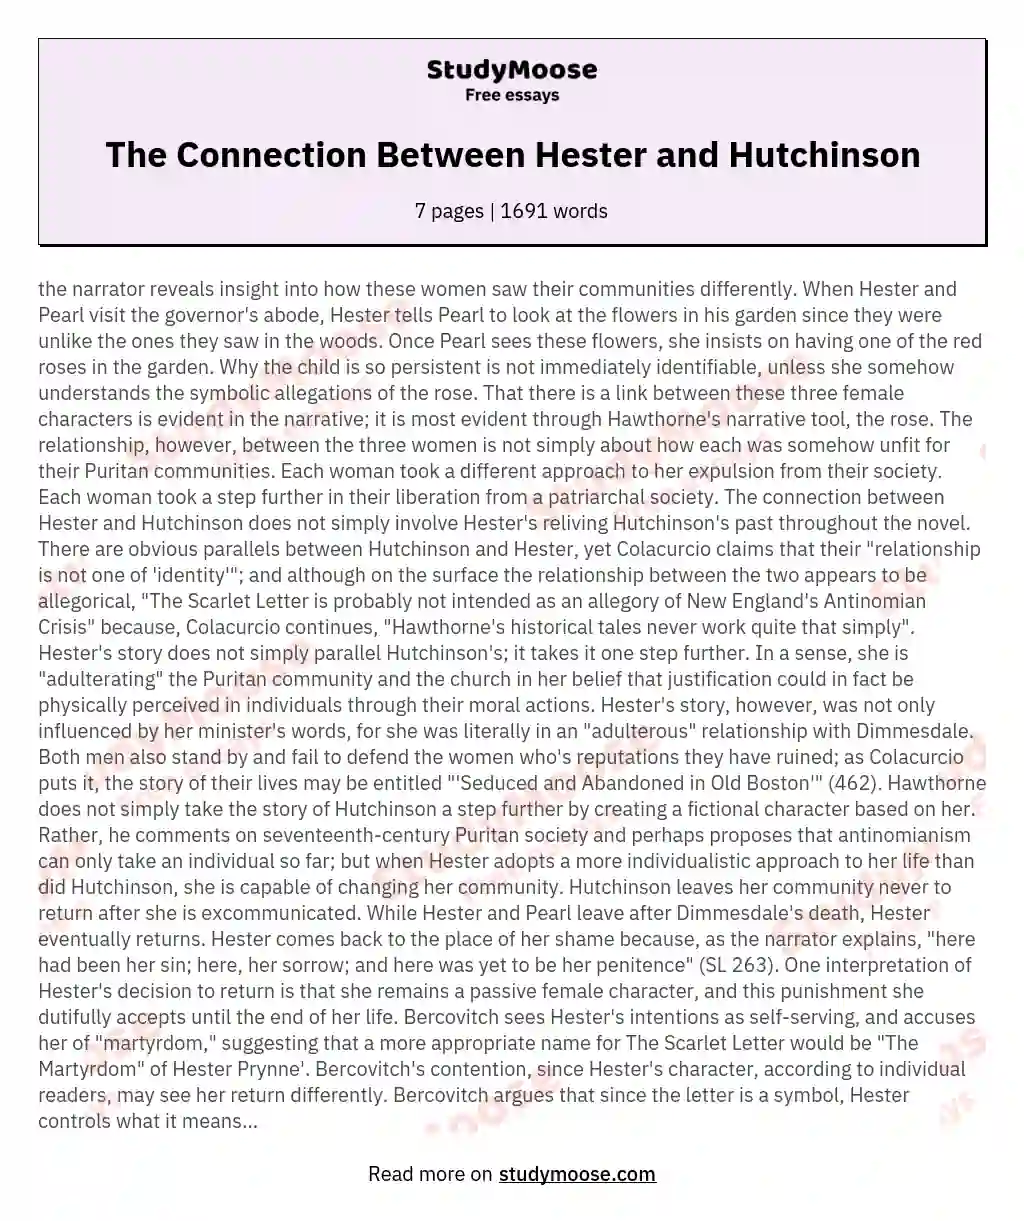 The Connection Between Hester and Hutchinson essay